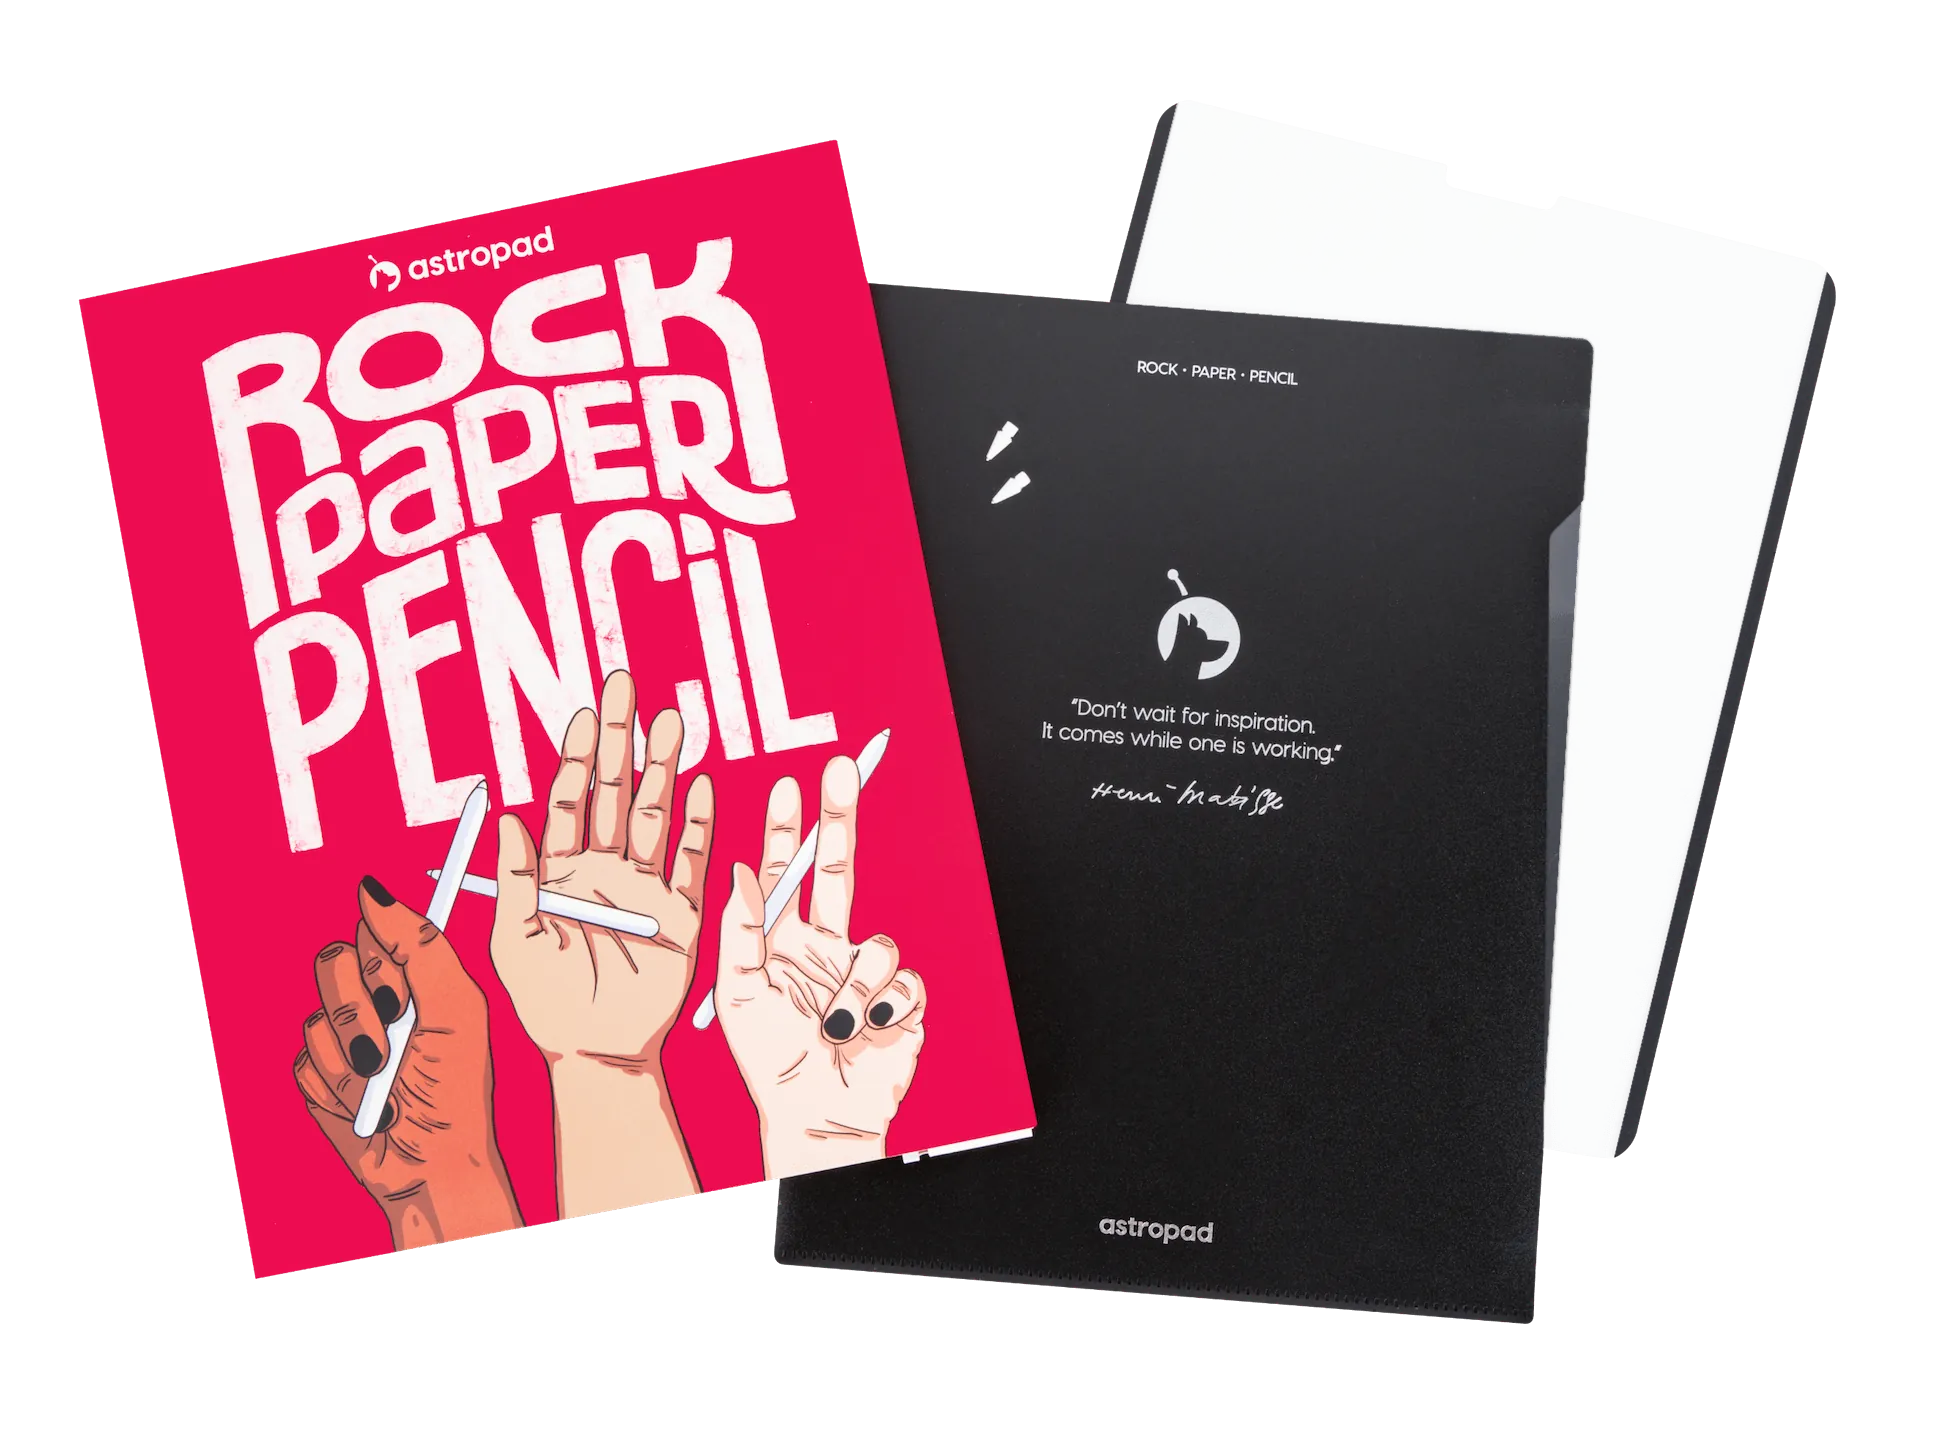 How to install Rock Paper Pencil - Knowledge Base